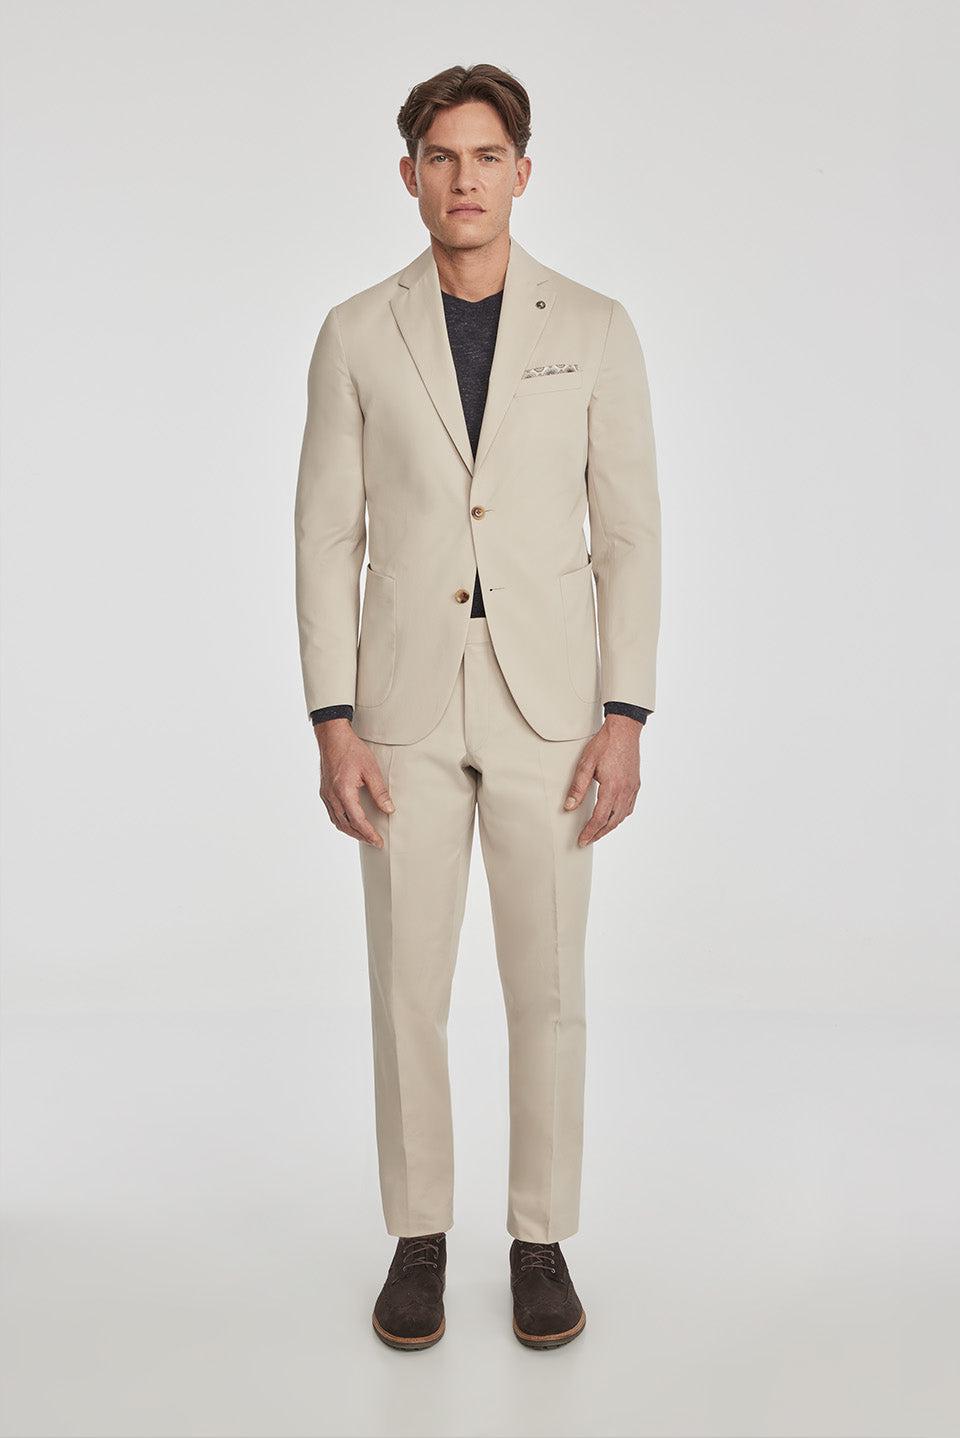 Alt view 2 Irving Solid Cotton and Cashmere Stretch Suit in Tan